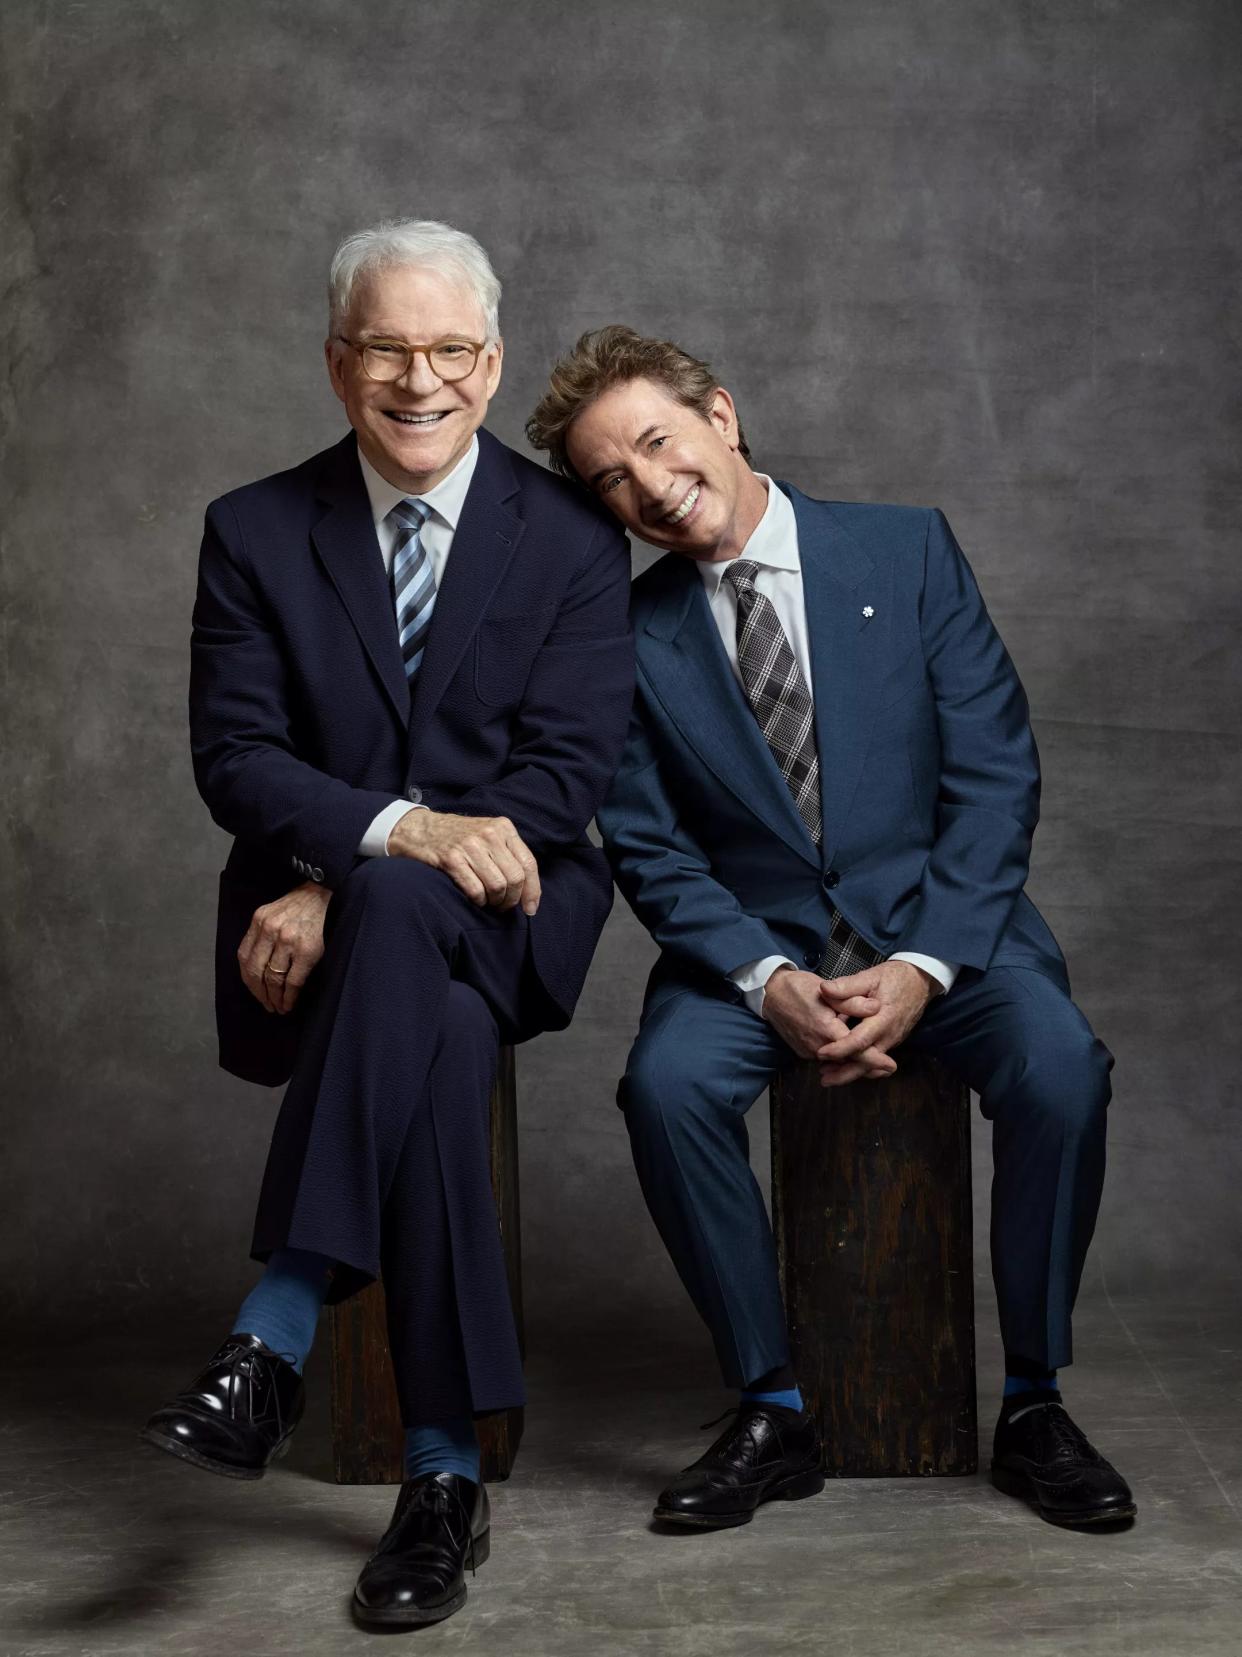 Comedy titans Steve Martin and Martin Short bring their new show, "The Dukes of Funnytown!" to Mershon Auditorium on Nov. 1.